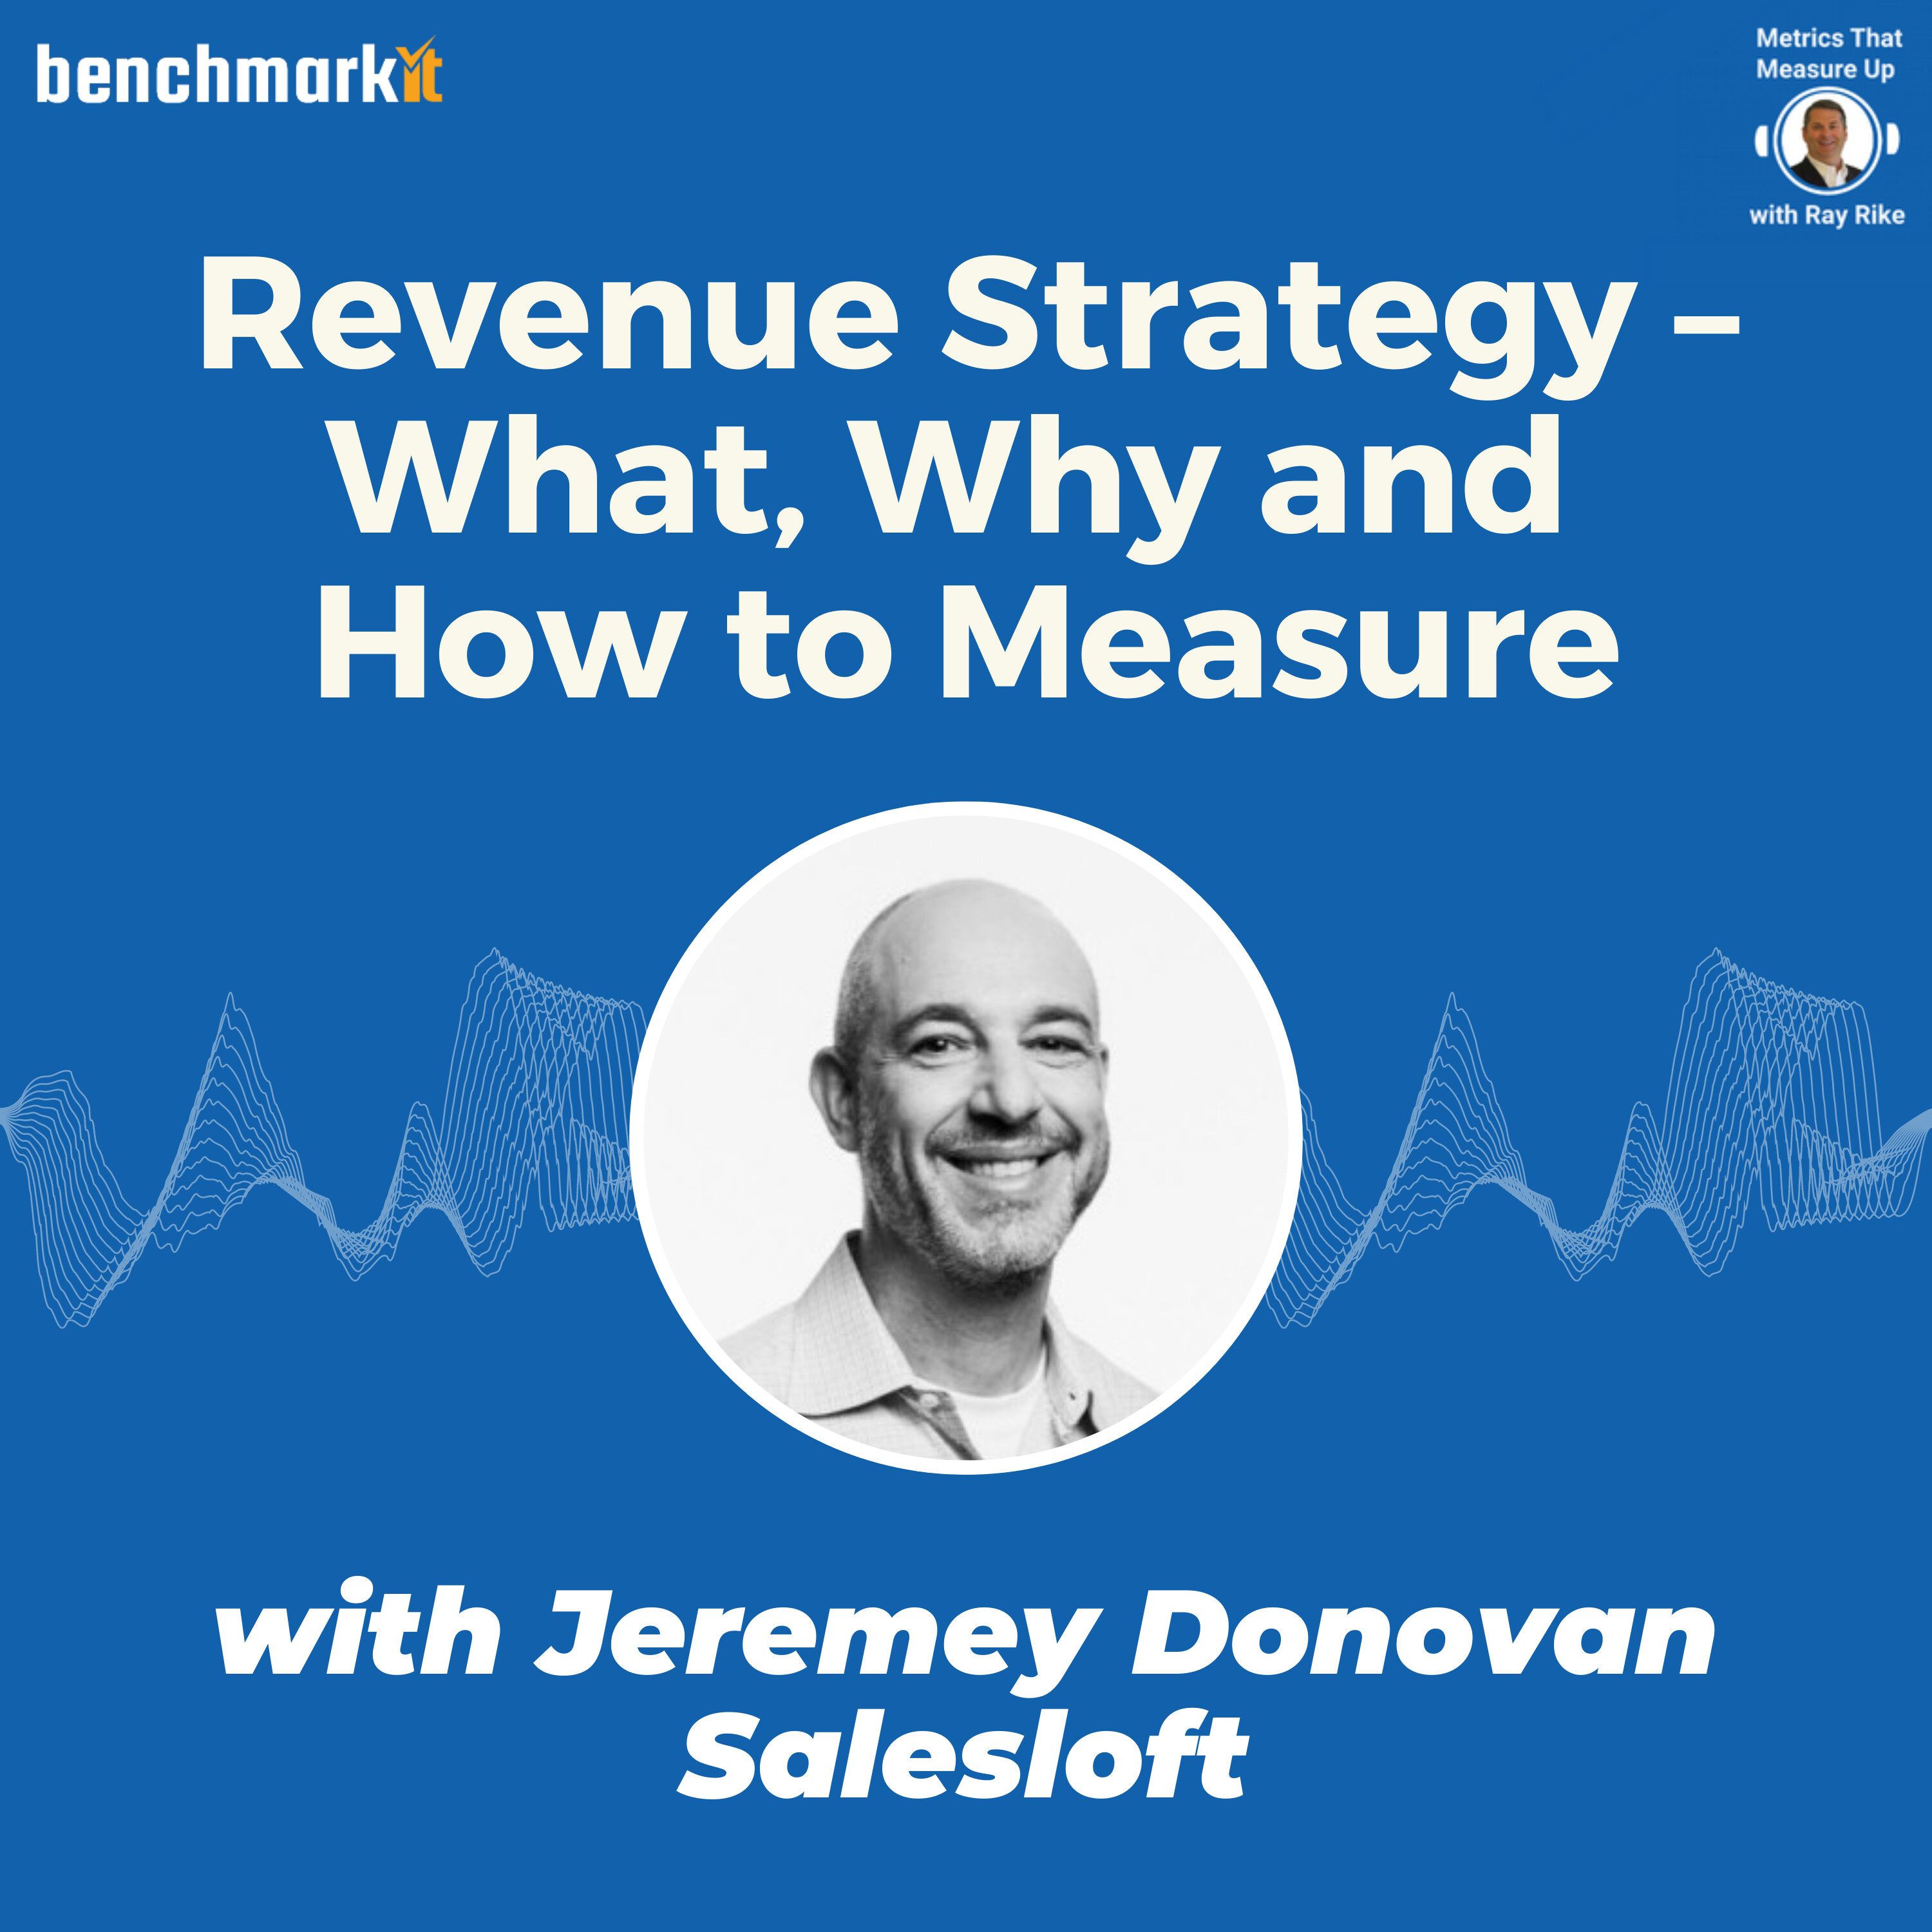 Revenue Strategy - What, Why and How to Measure the Impact with Jeremey Donovan, SVP Revenue Strategy at SalesLoft